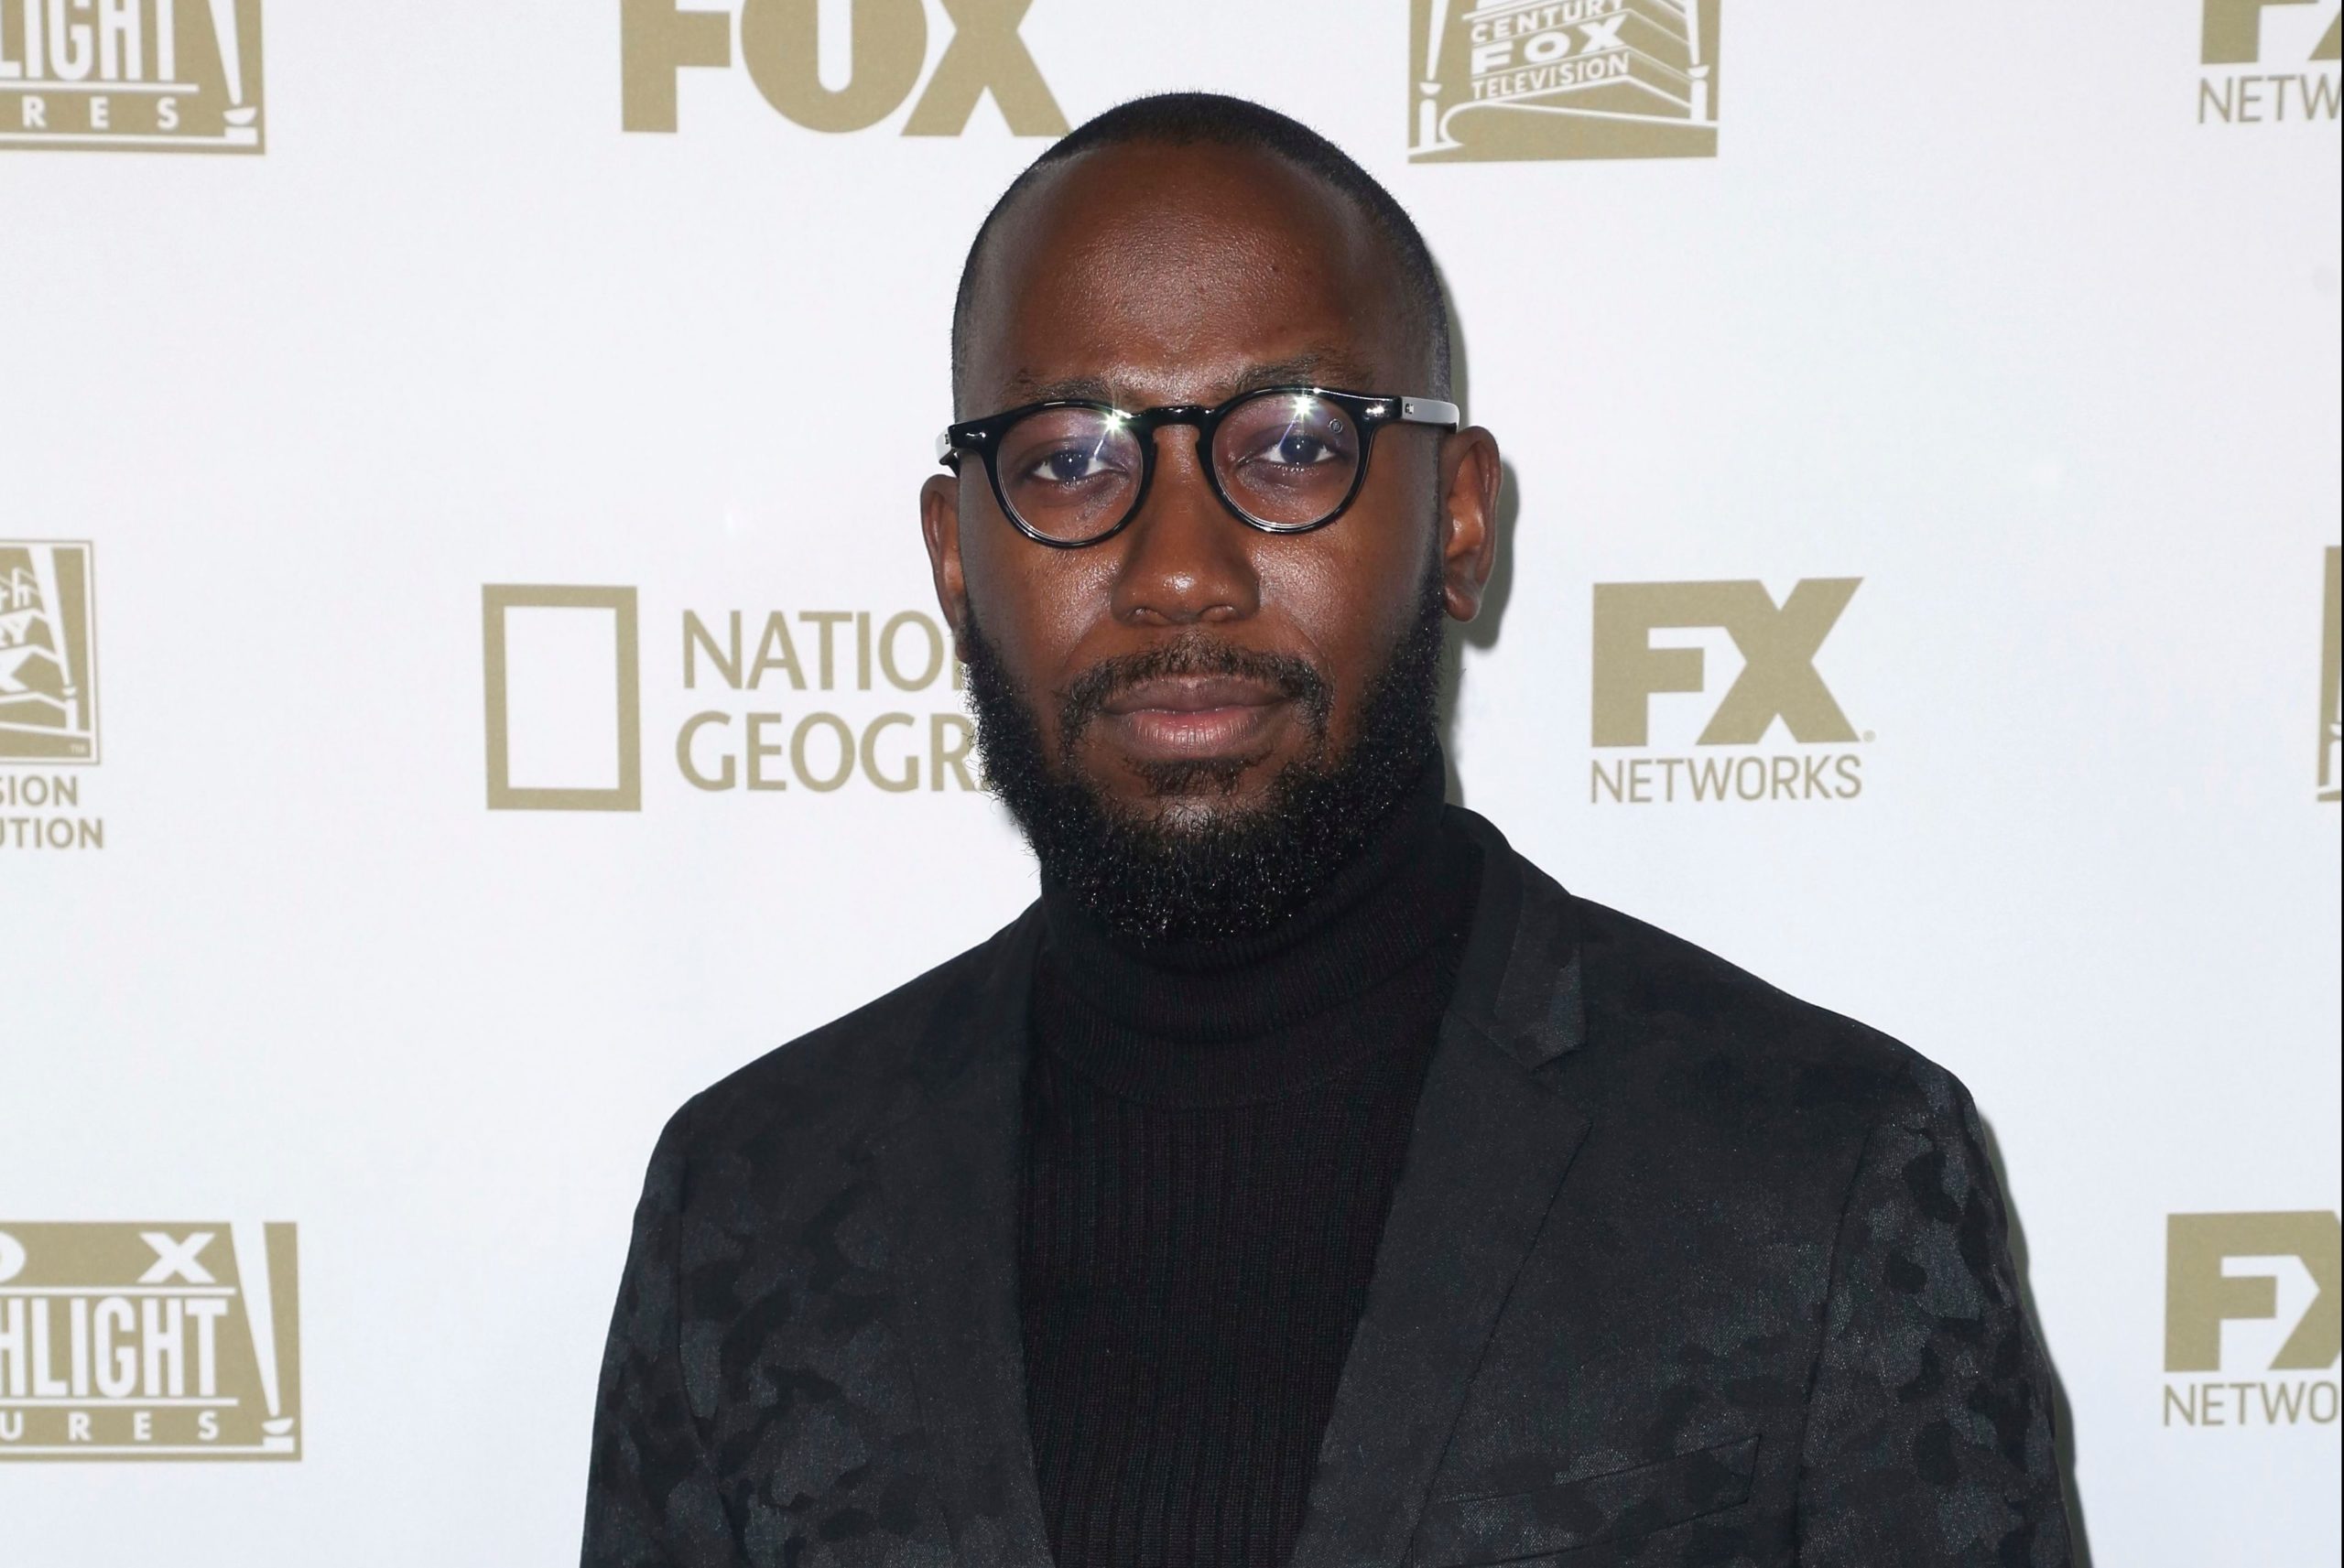 Lamorne Morris will play the lead role of Keef Knight